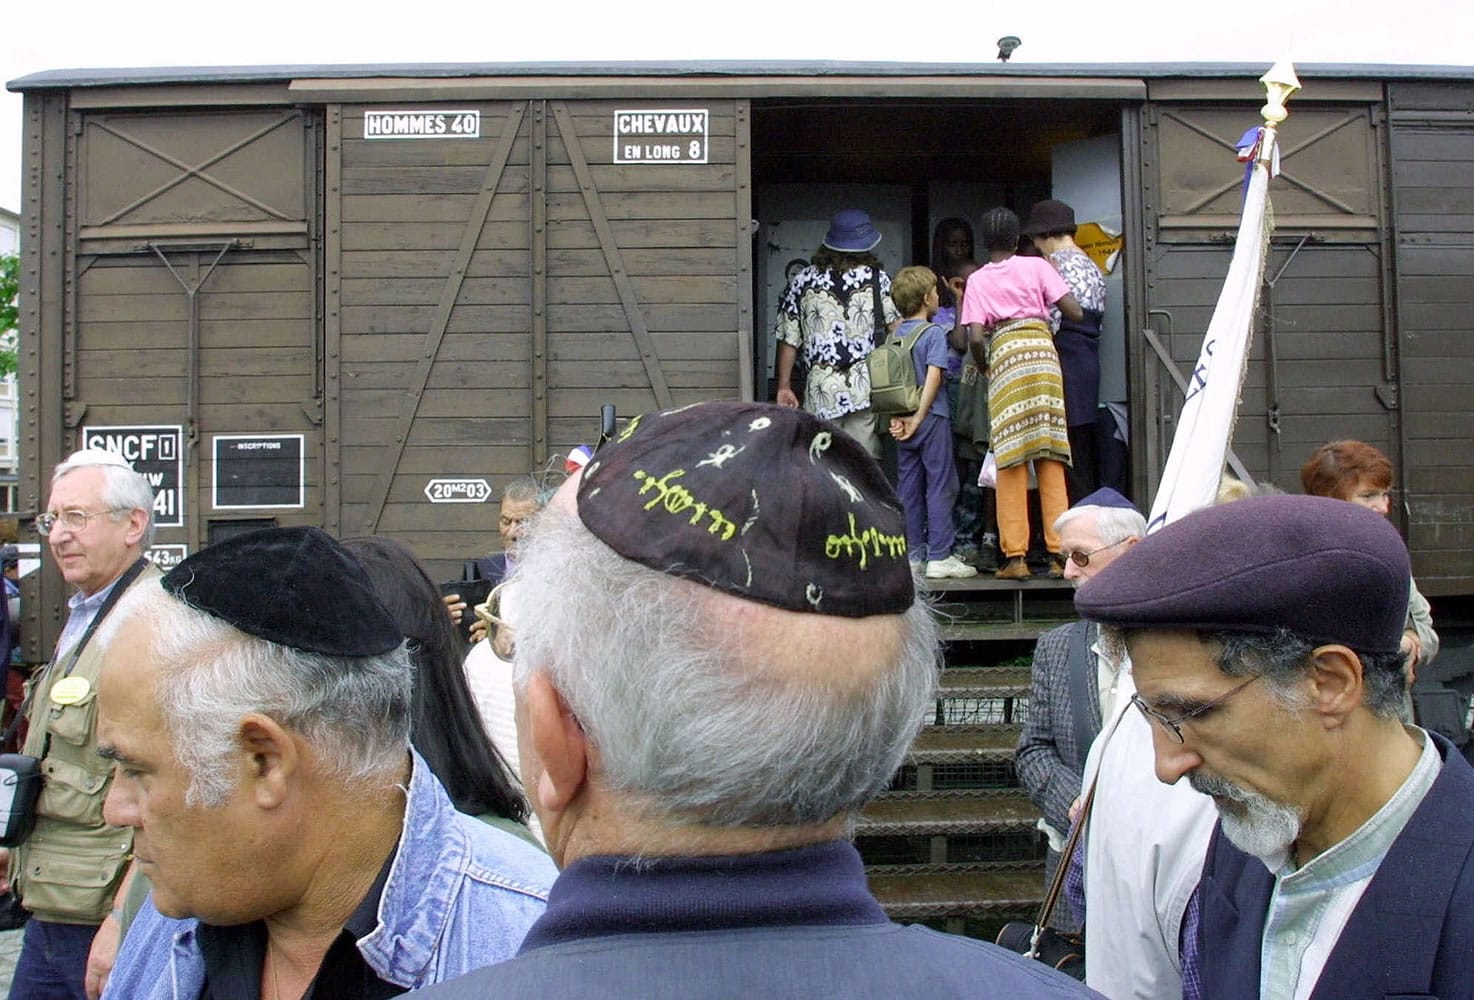 French Holocaust survivors gather Aug. 20, 2001, at the site of the former Drancy detention camp, north of Paris, France. From Aug. 20, 1941 until the end of World War II, more than 70,000 Jewish men, women and children passed through Drancy on their way to Nazi extermination camps, particularly Auschwitz. The wagon is part of the memorial site. Hundreds of Americans and others deported by France's state rail company SNCF during the Nazi occupation will be entitled to compensation under a new U.S.-French agreement. The French Foreign Ministry and U.S. State Department announced an accord Friday for a $60 million compensation fund, financed by France and managed by the United States. SNCF transported about 76,000 French Jews to Nazi concentration camps.